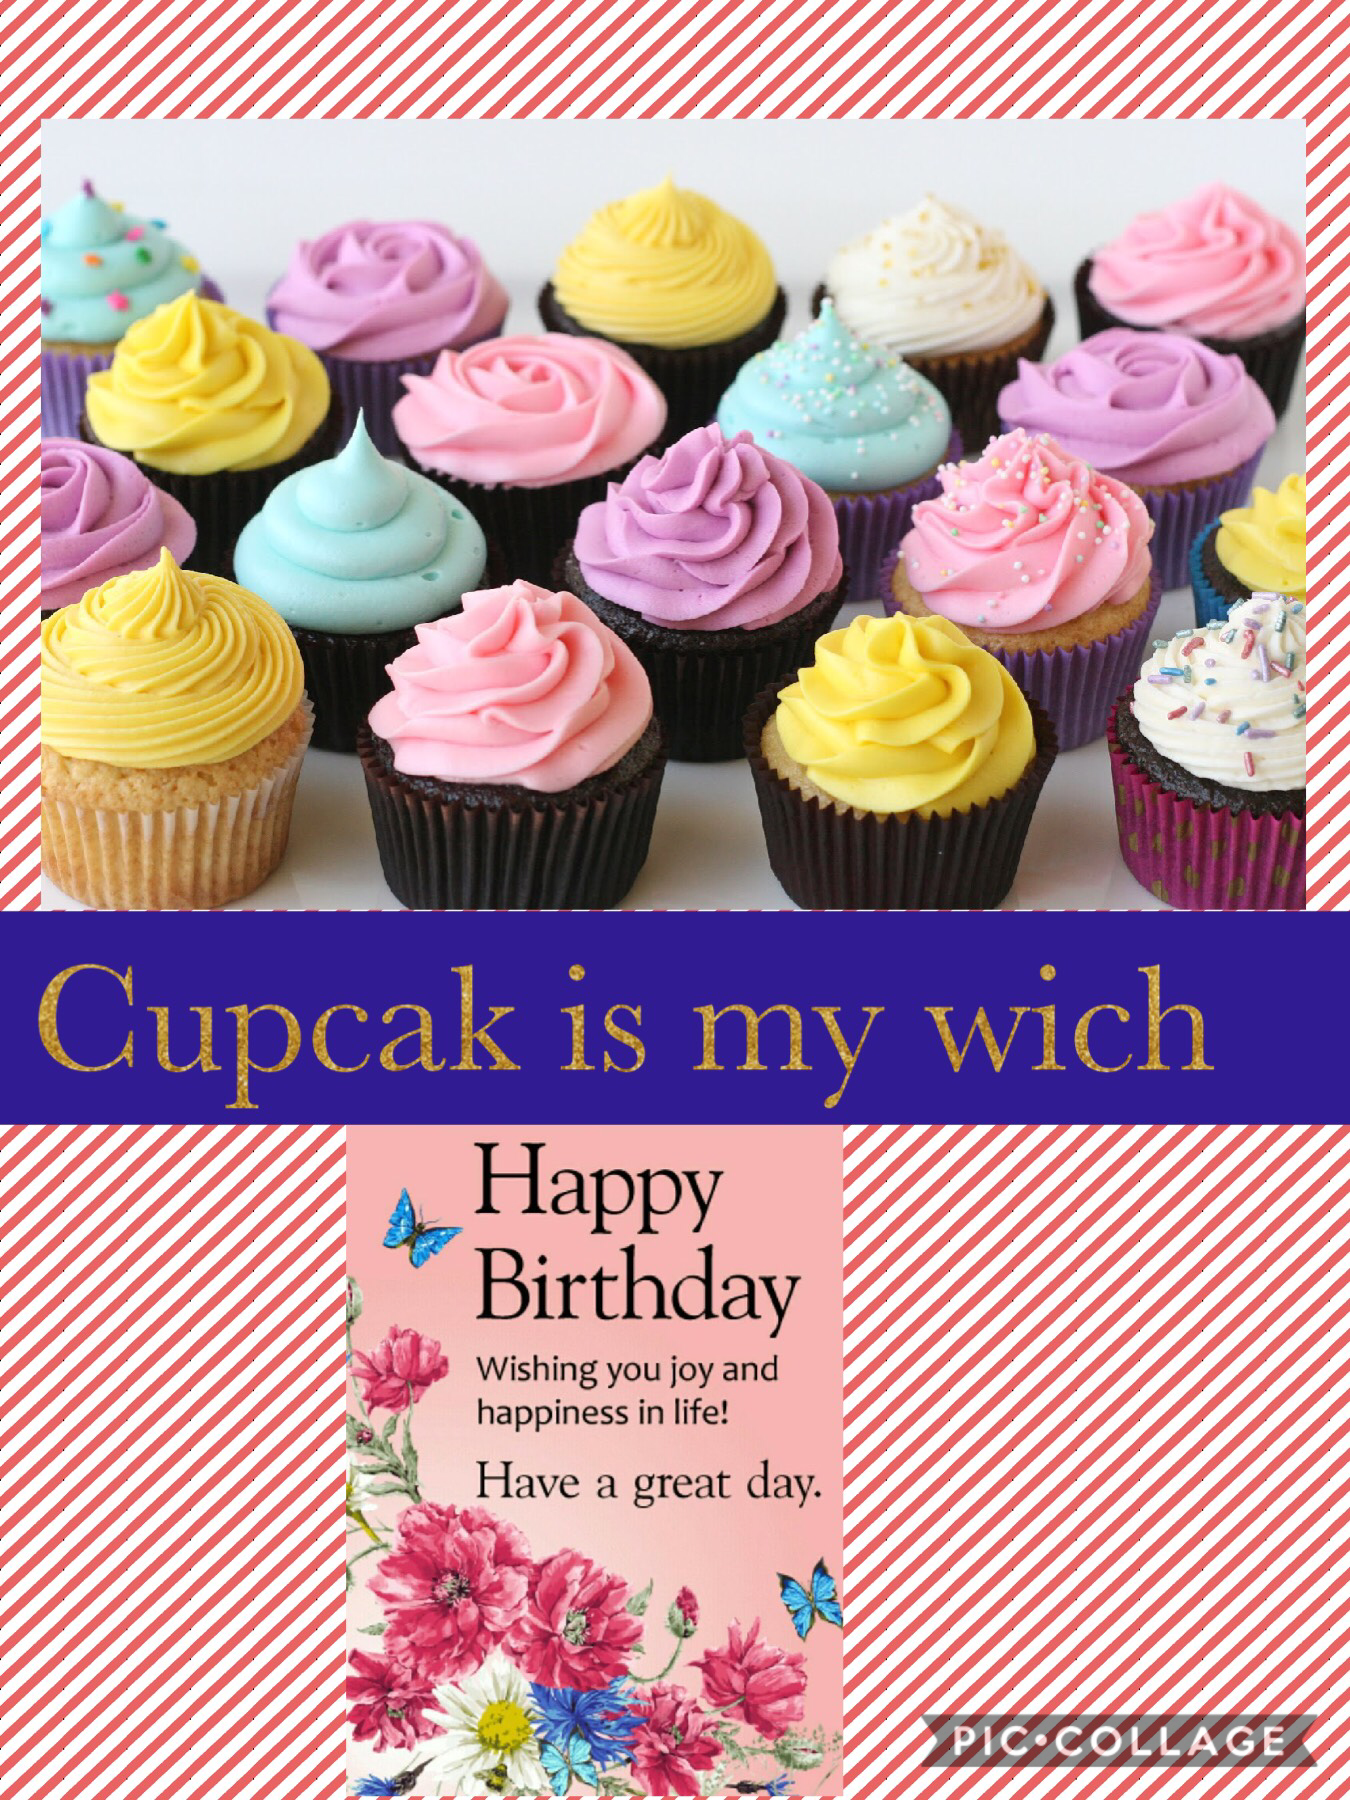 Cupcaks party 